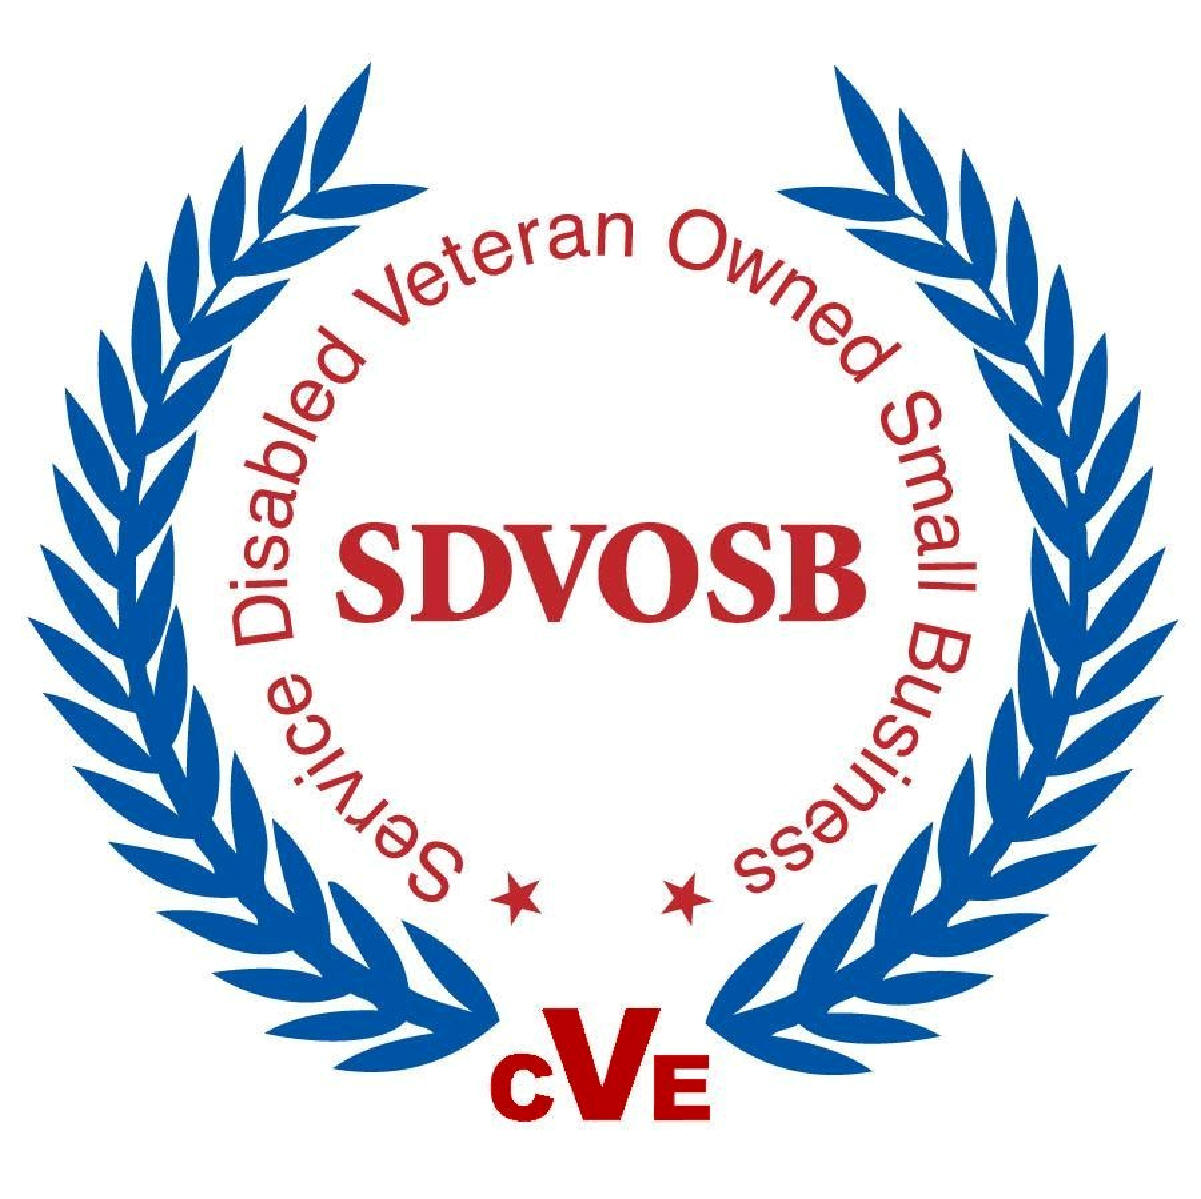 Women Owned Business and Service Disabled Veteran